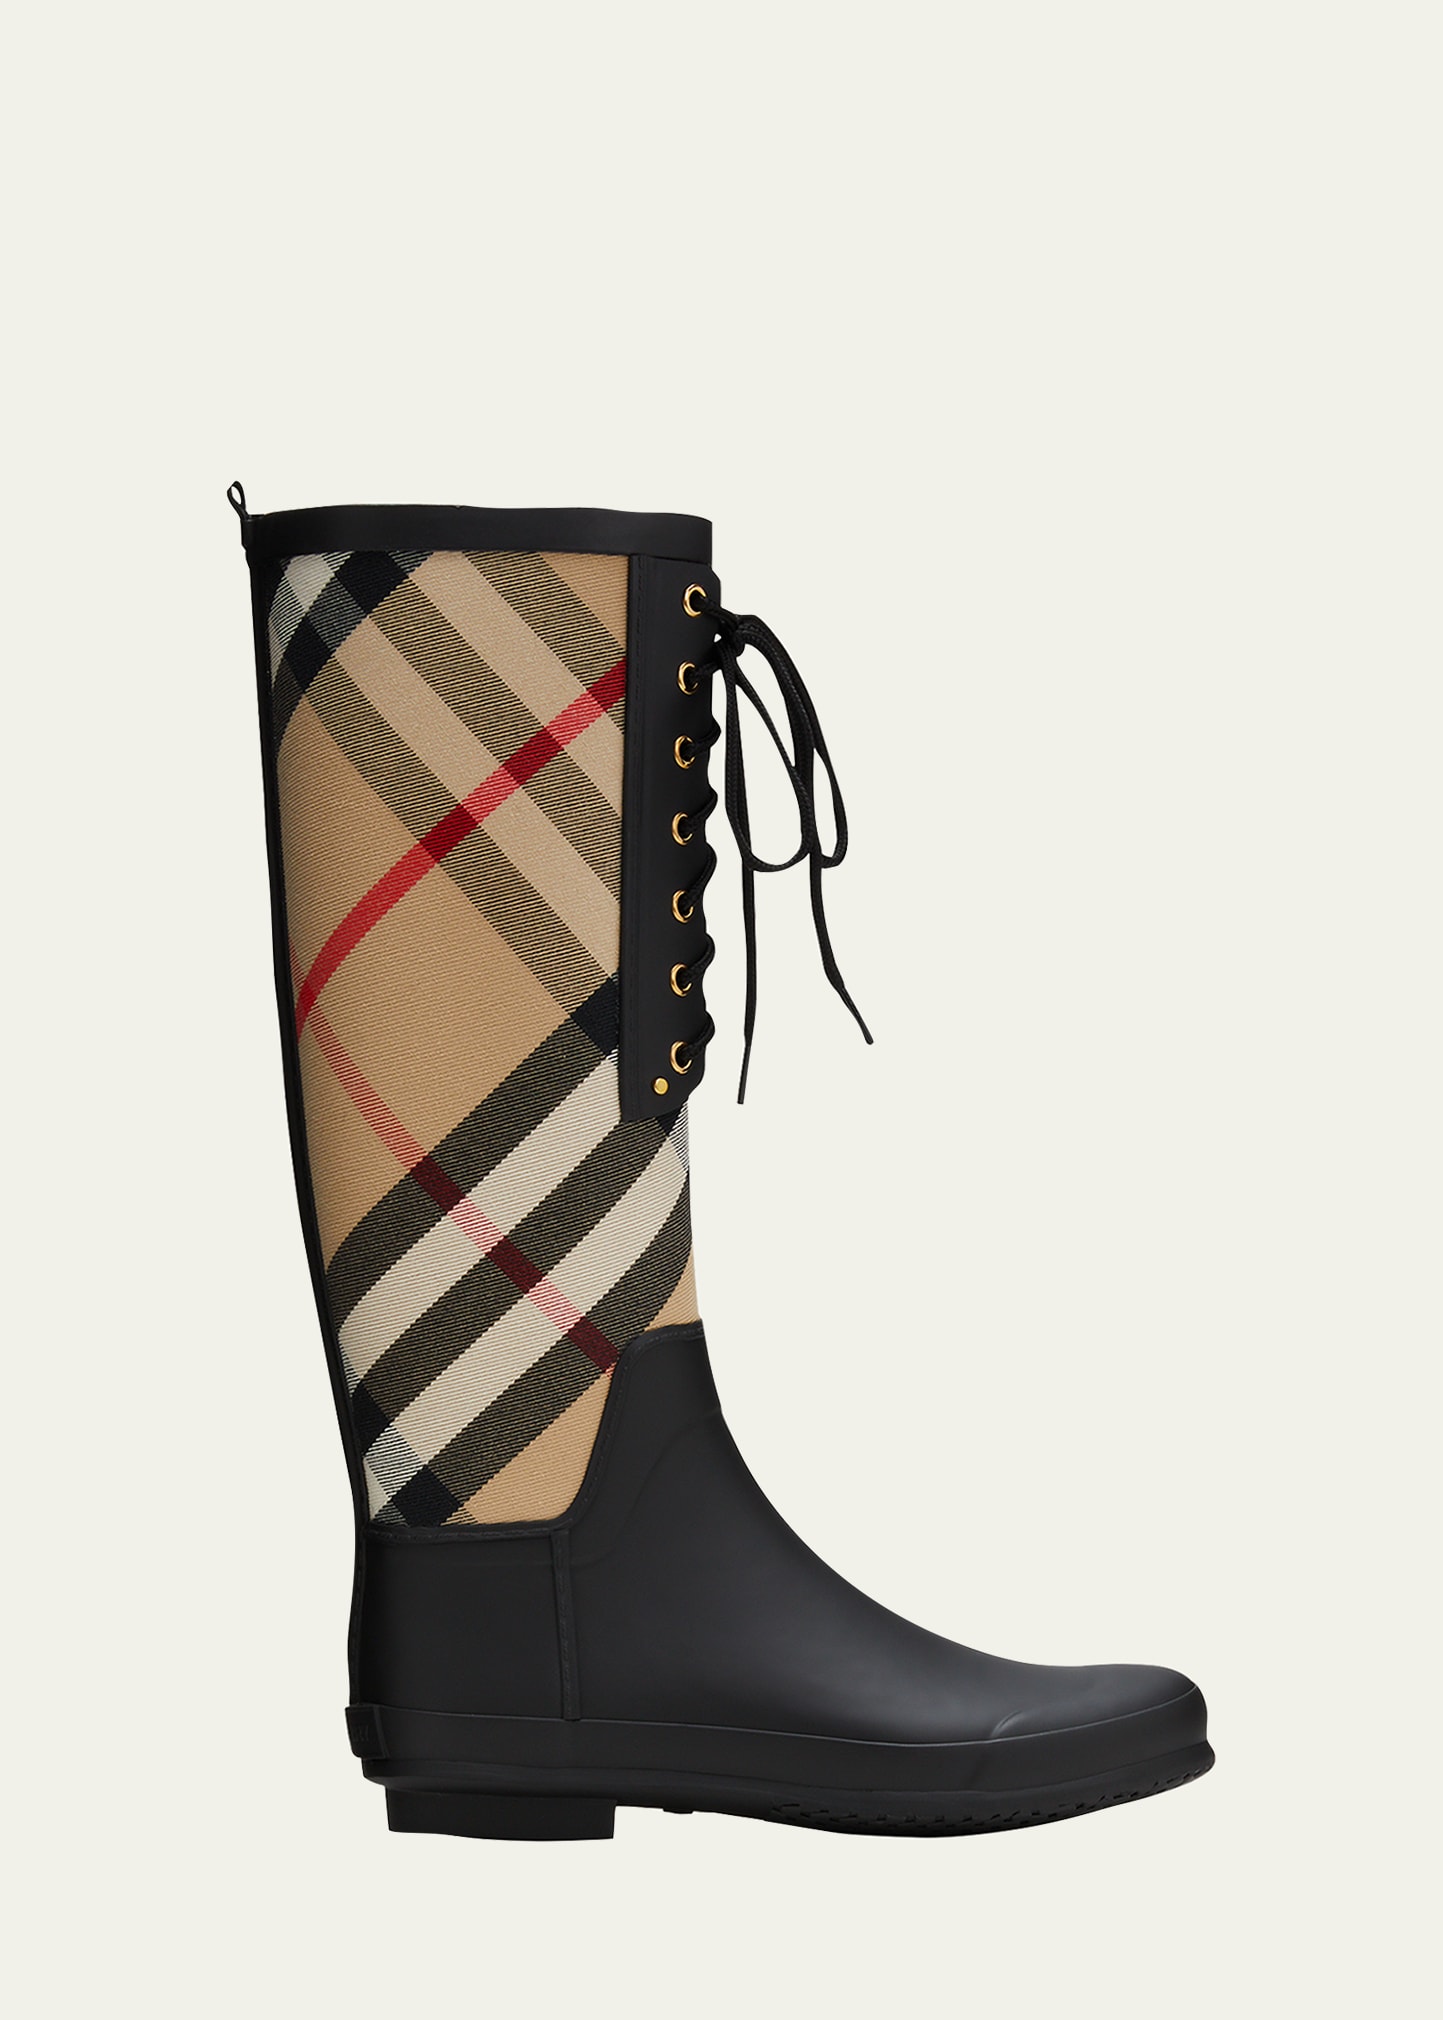 Find Your Style: Simeon Burberry Boots Sale